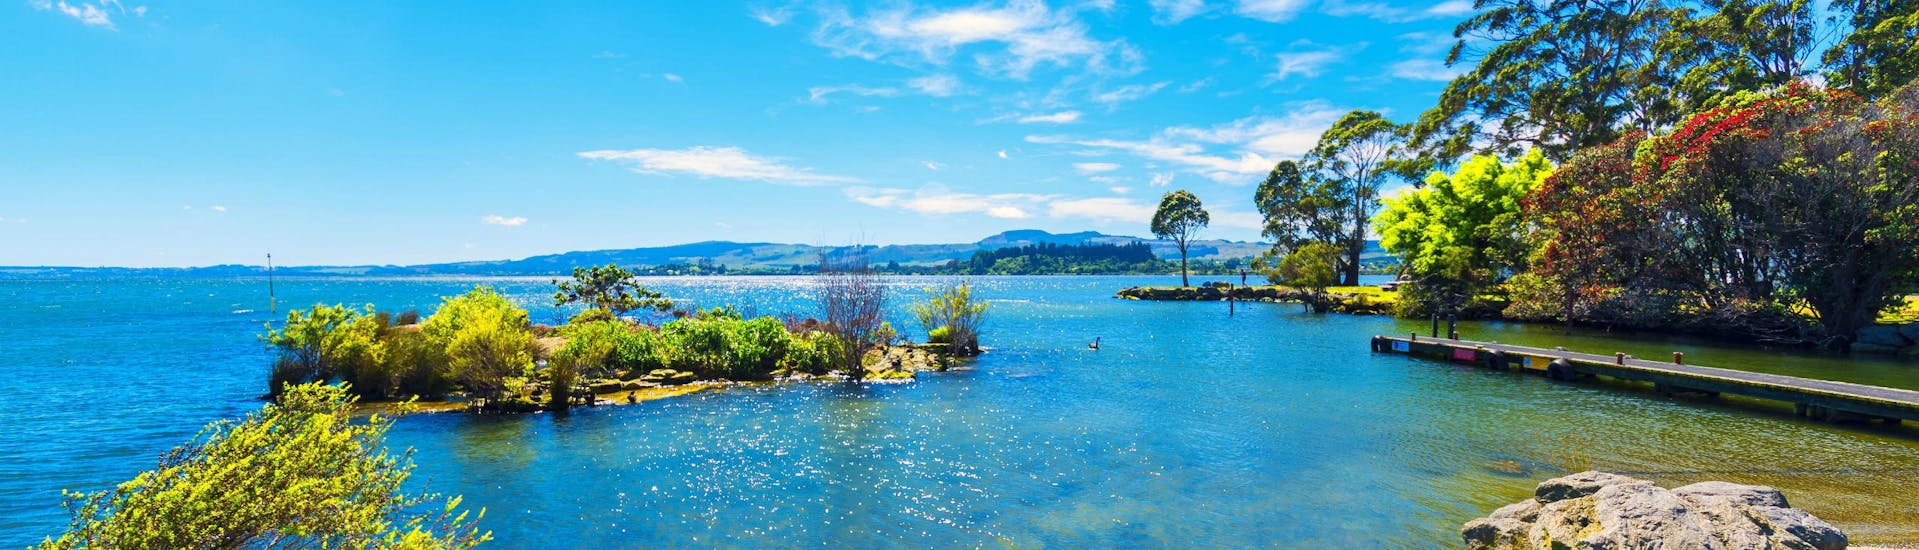 An image of one of the Rotorua Lakes on New Zealand's North Island, a popular place to go Stand Up Paddleboarding.